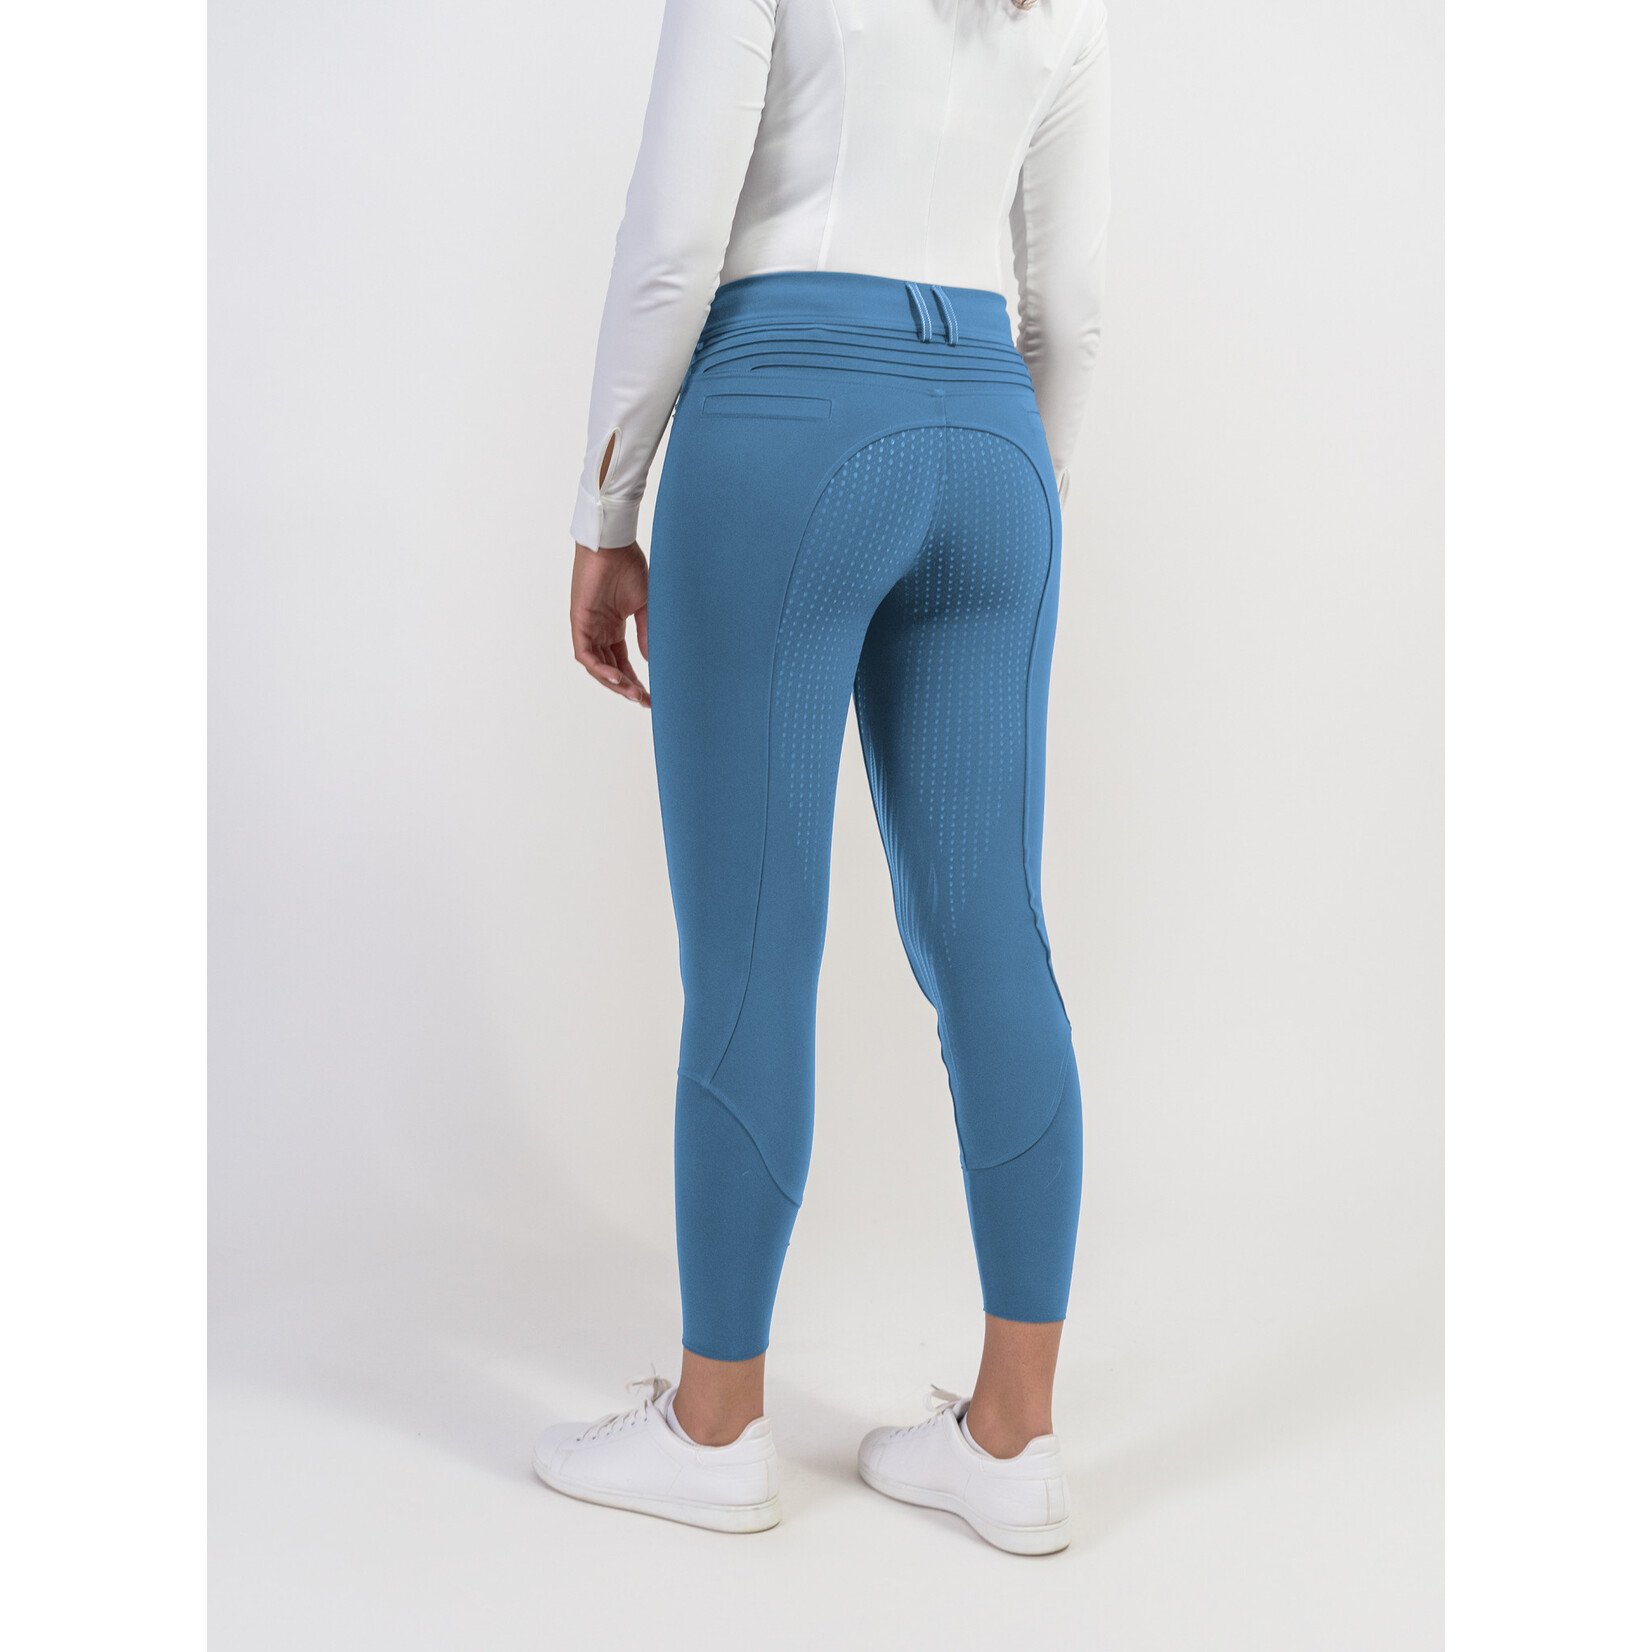 CLEAROUT-Samshield Chloe Embroidered Ladies Schooling Breech